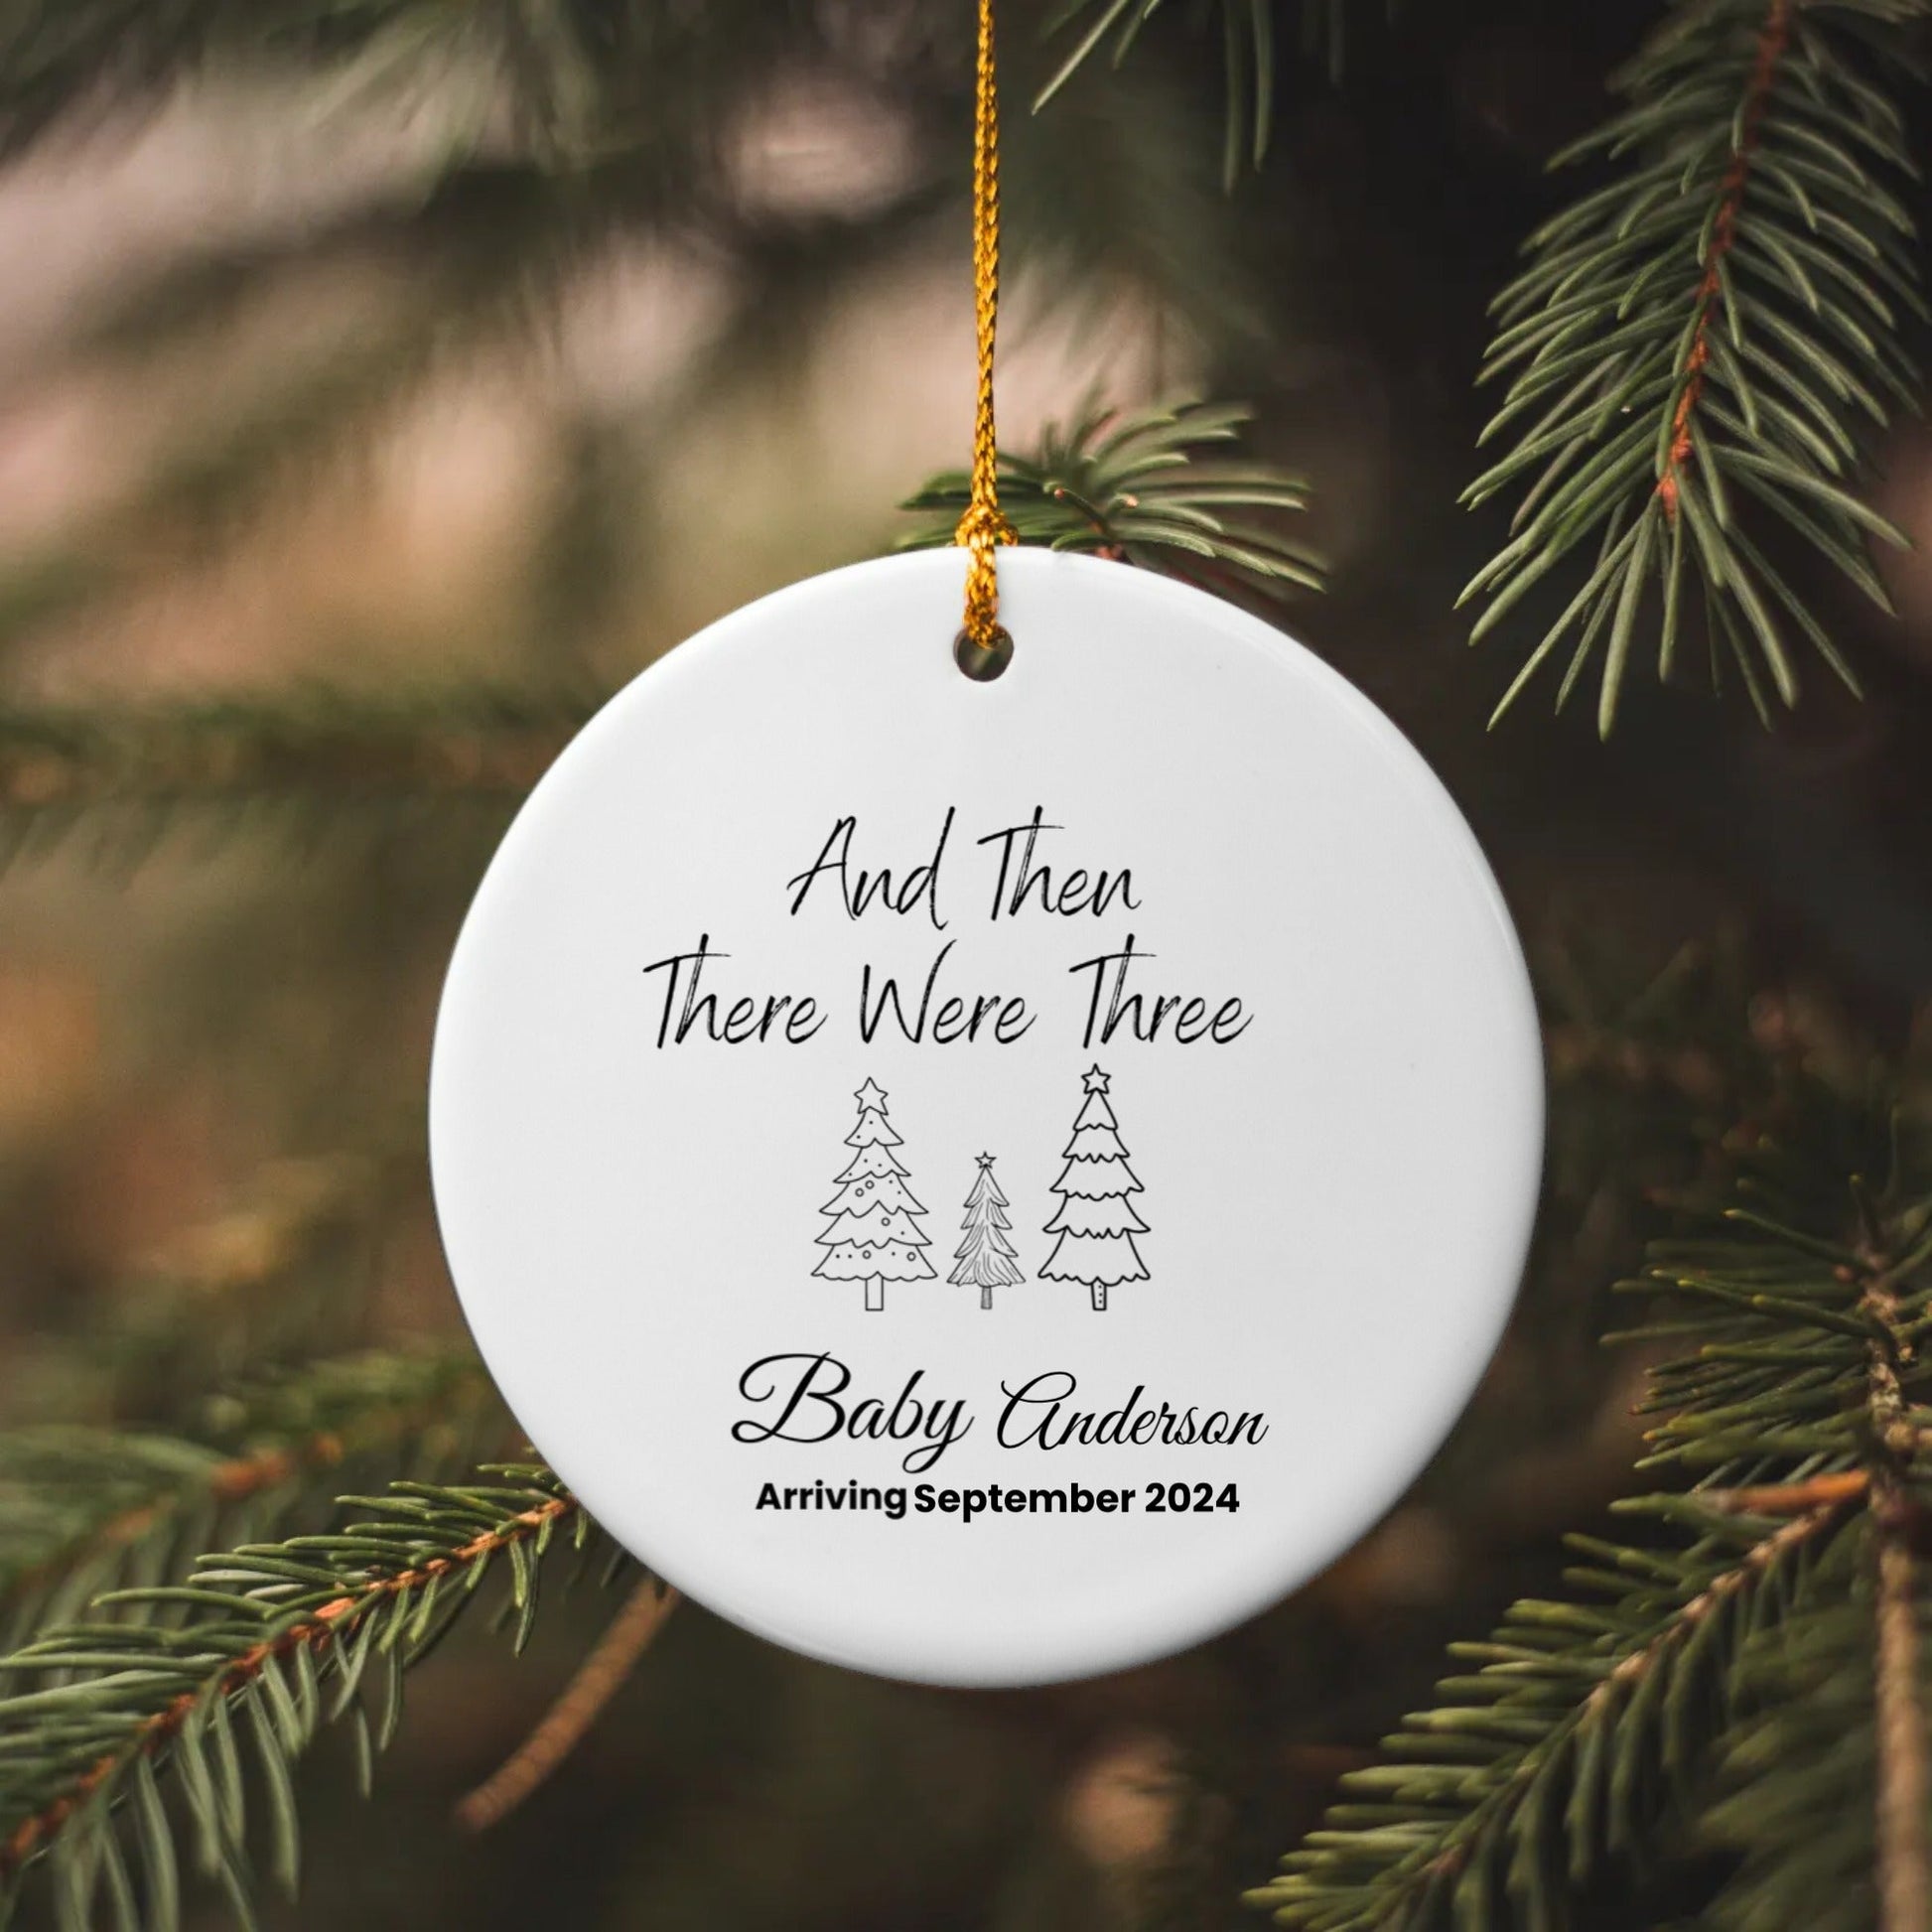 Get trendy with "And then There were Three"  Ornament -  available at Good Gift Company. Grab yours for $12.50 today!